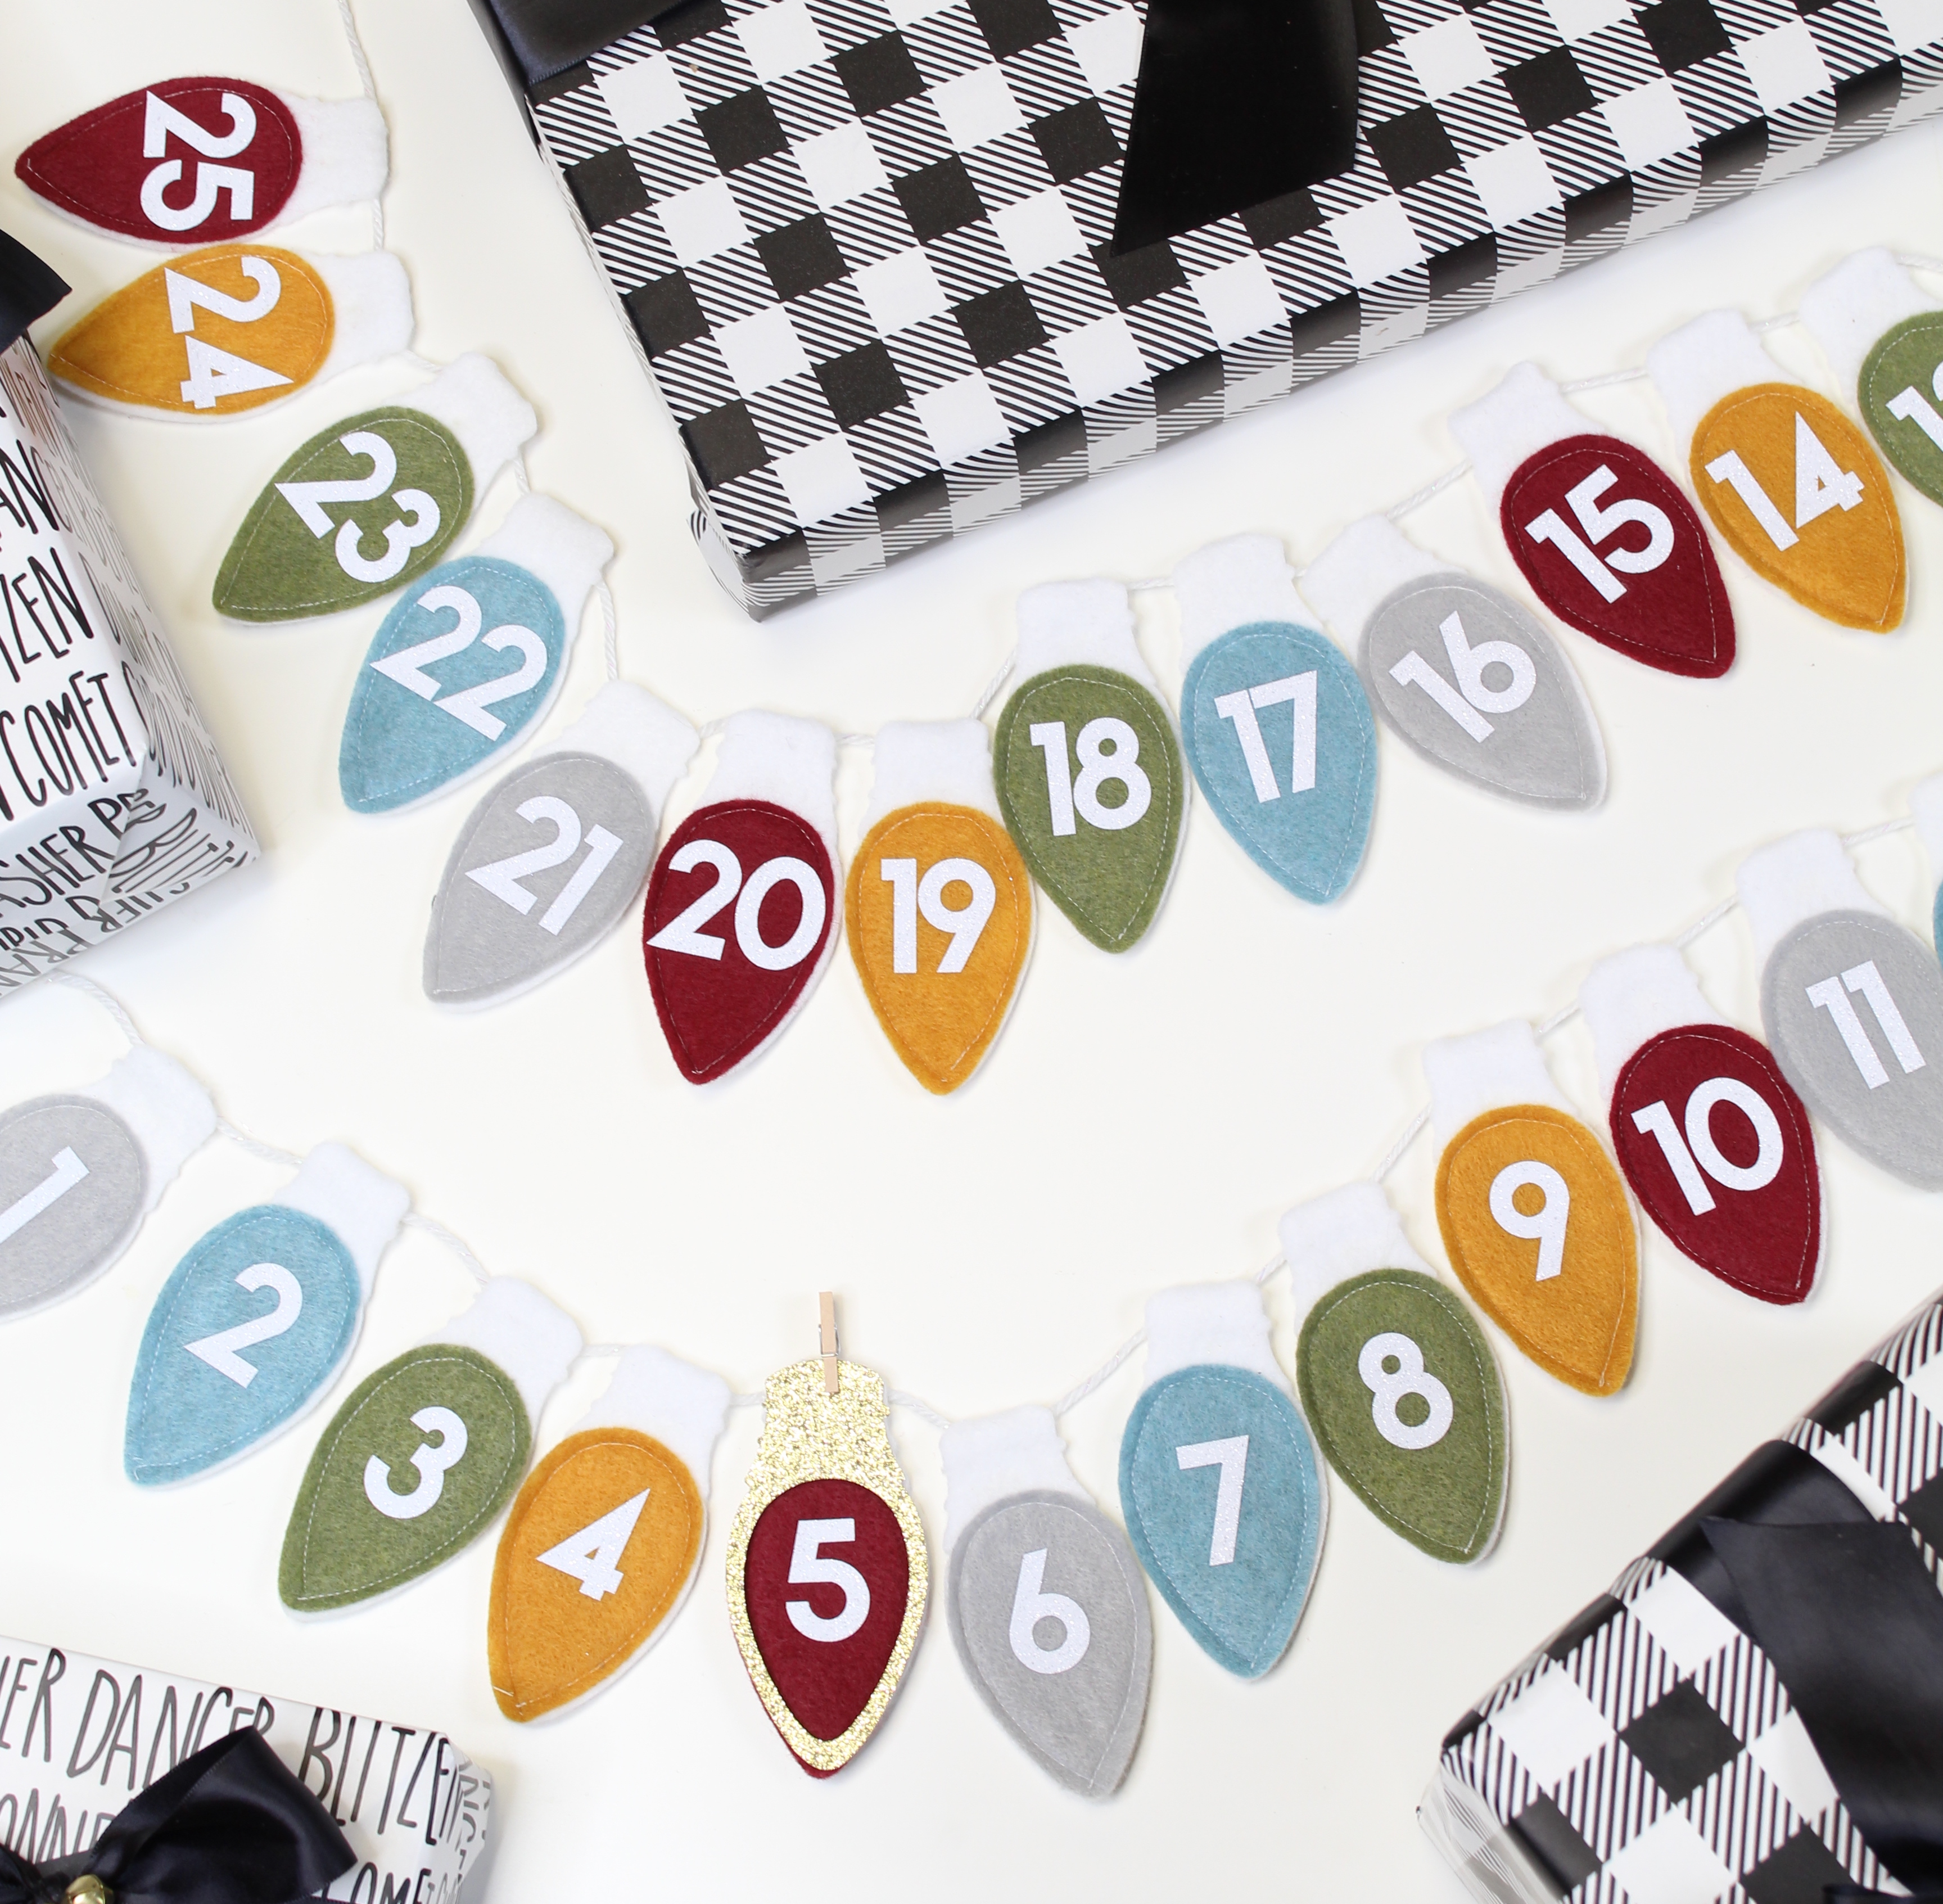 Get in the holiday spirit with this DIY felt advent banner!